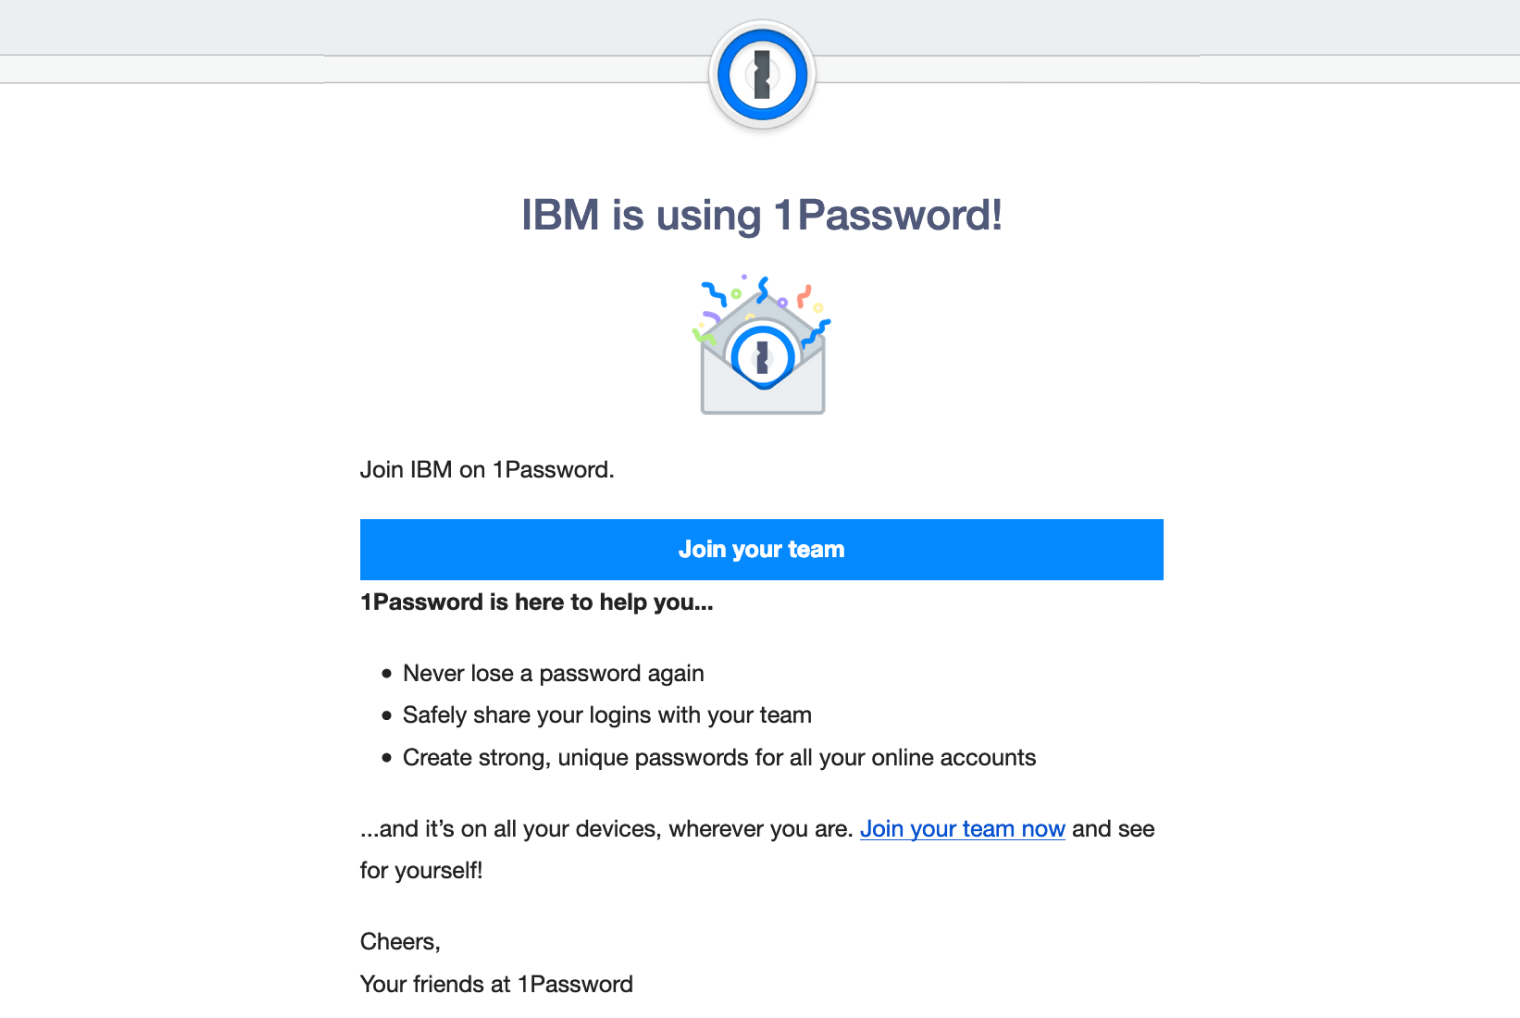 Invitation email to join IBM on 1Password